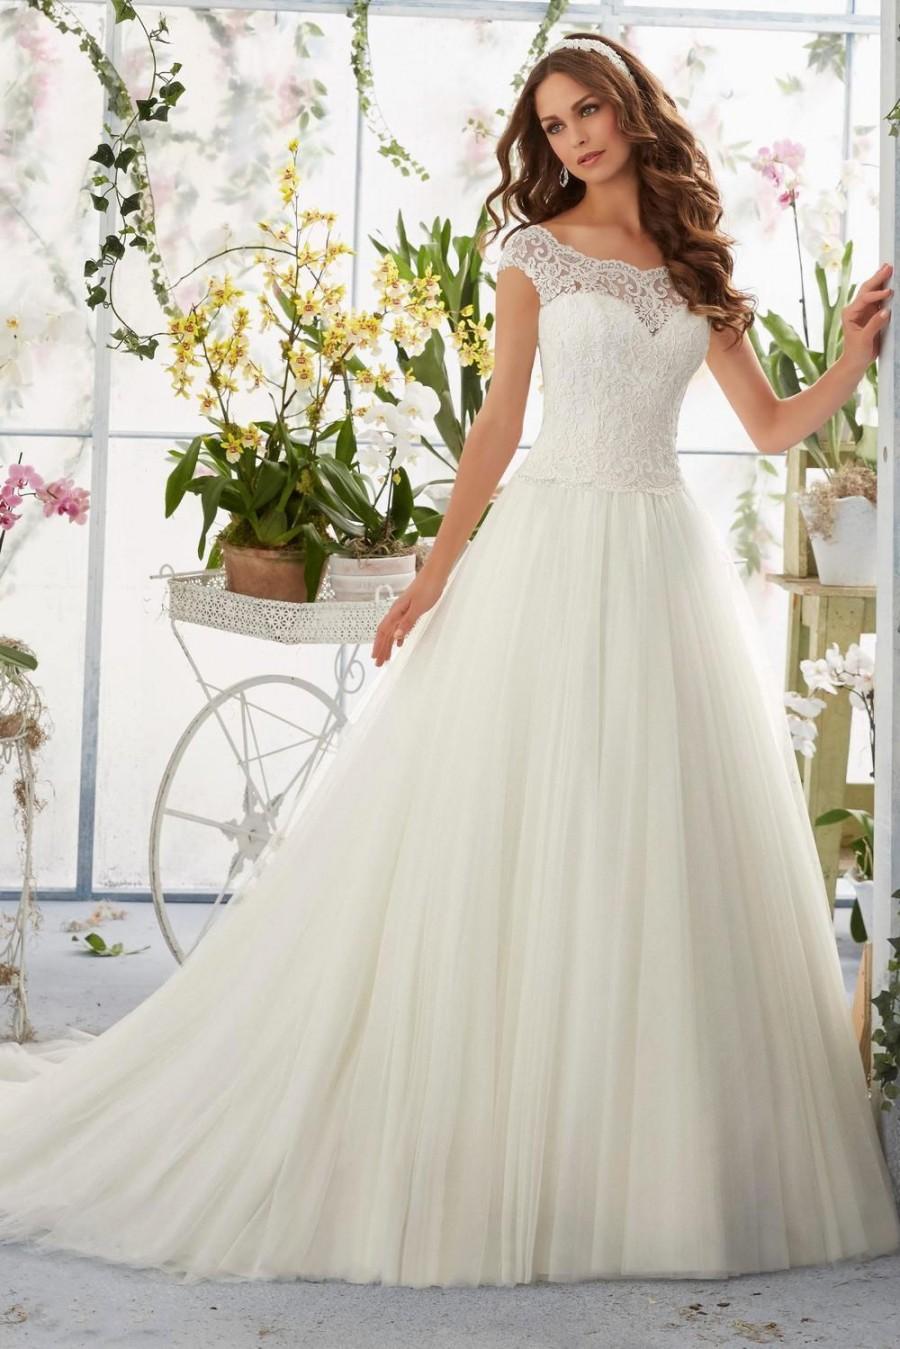 Wedding - 2016 Chic A-Line Sleeveless Wedding Dresses Bateau Court Train V-Back Dropped Waist Covered Button Tulle With Applique Online with $121.73/Piece on Hjklp88's Store 